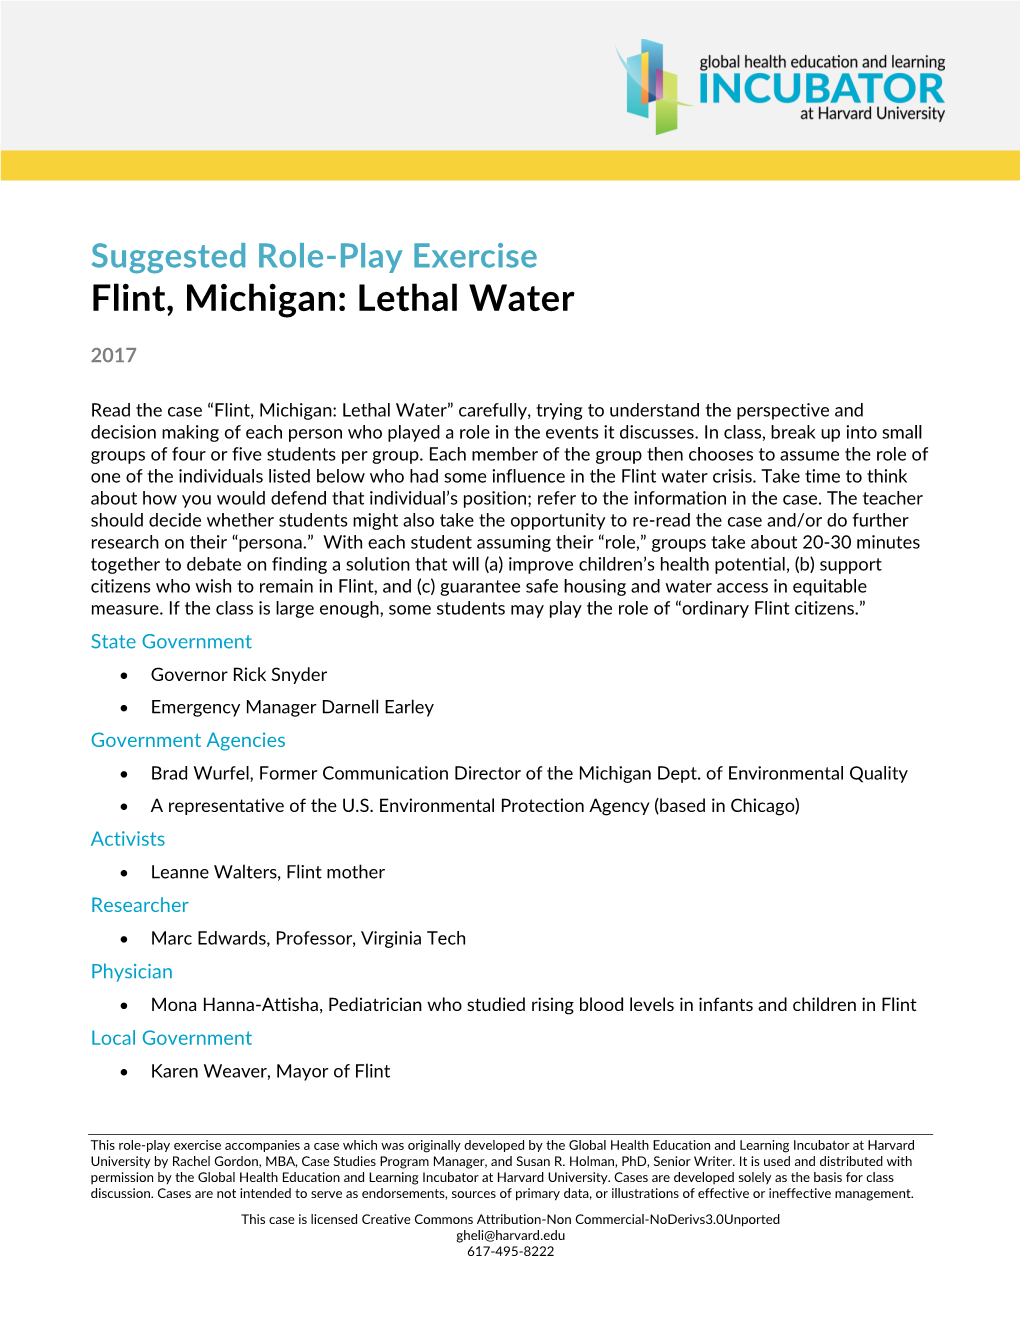 Role-Play Exercise Flint, Michigan: Lethal Water